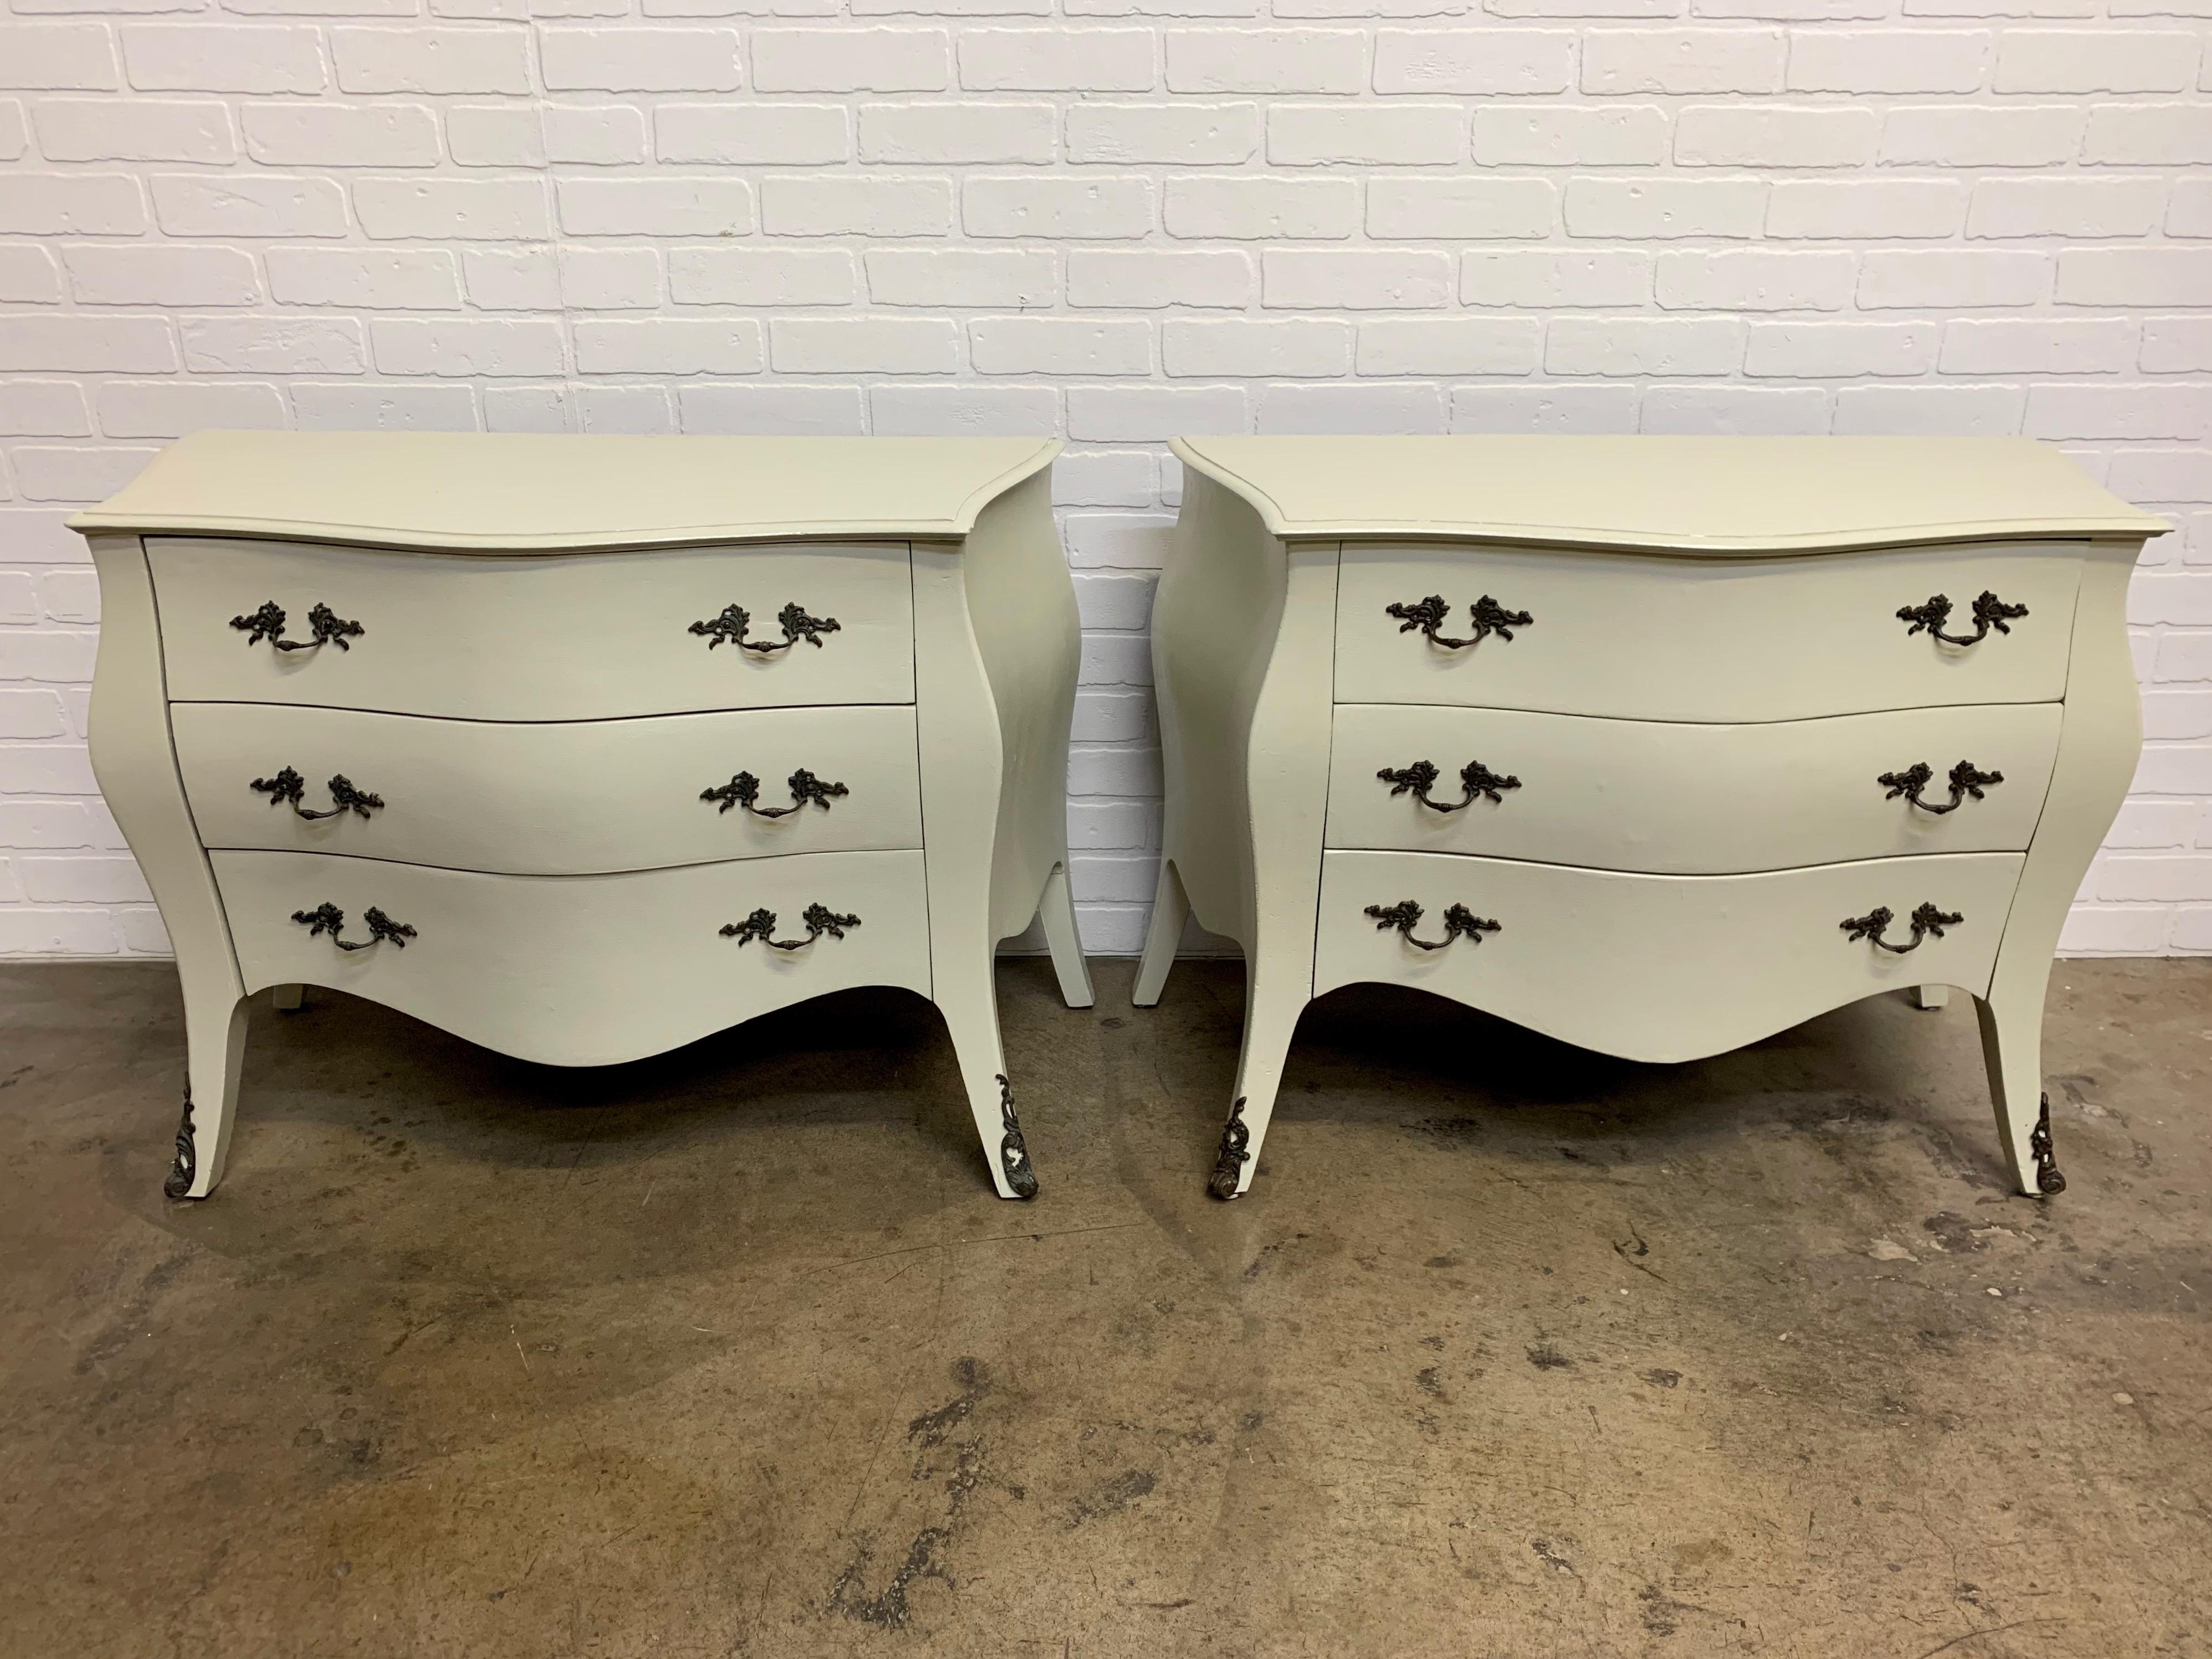 Made in Italy 1950's These were recently hand painted to add to the rustic look in a light green grey.